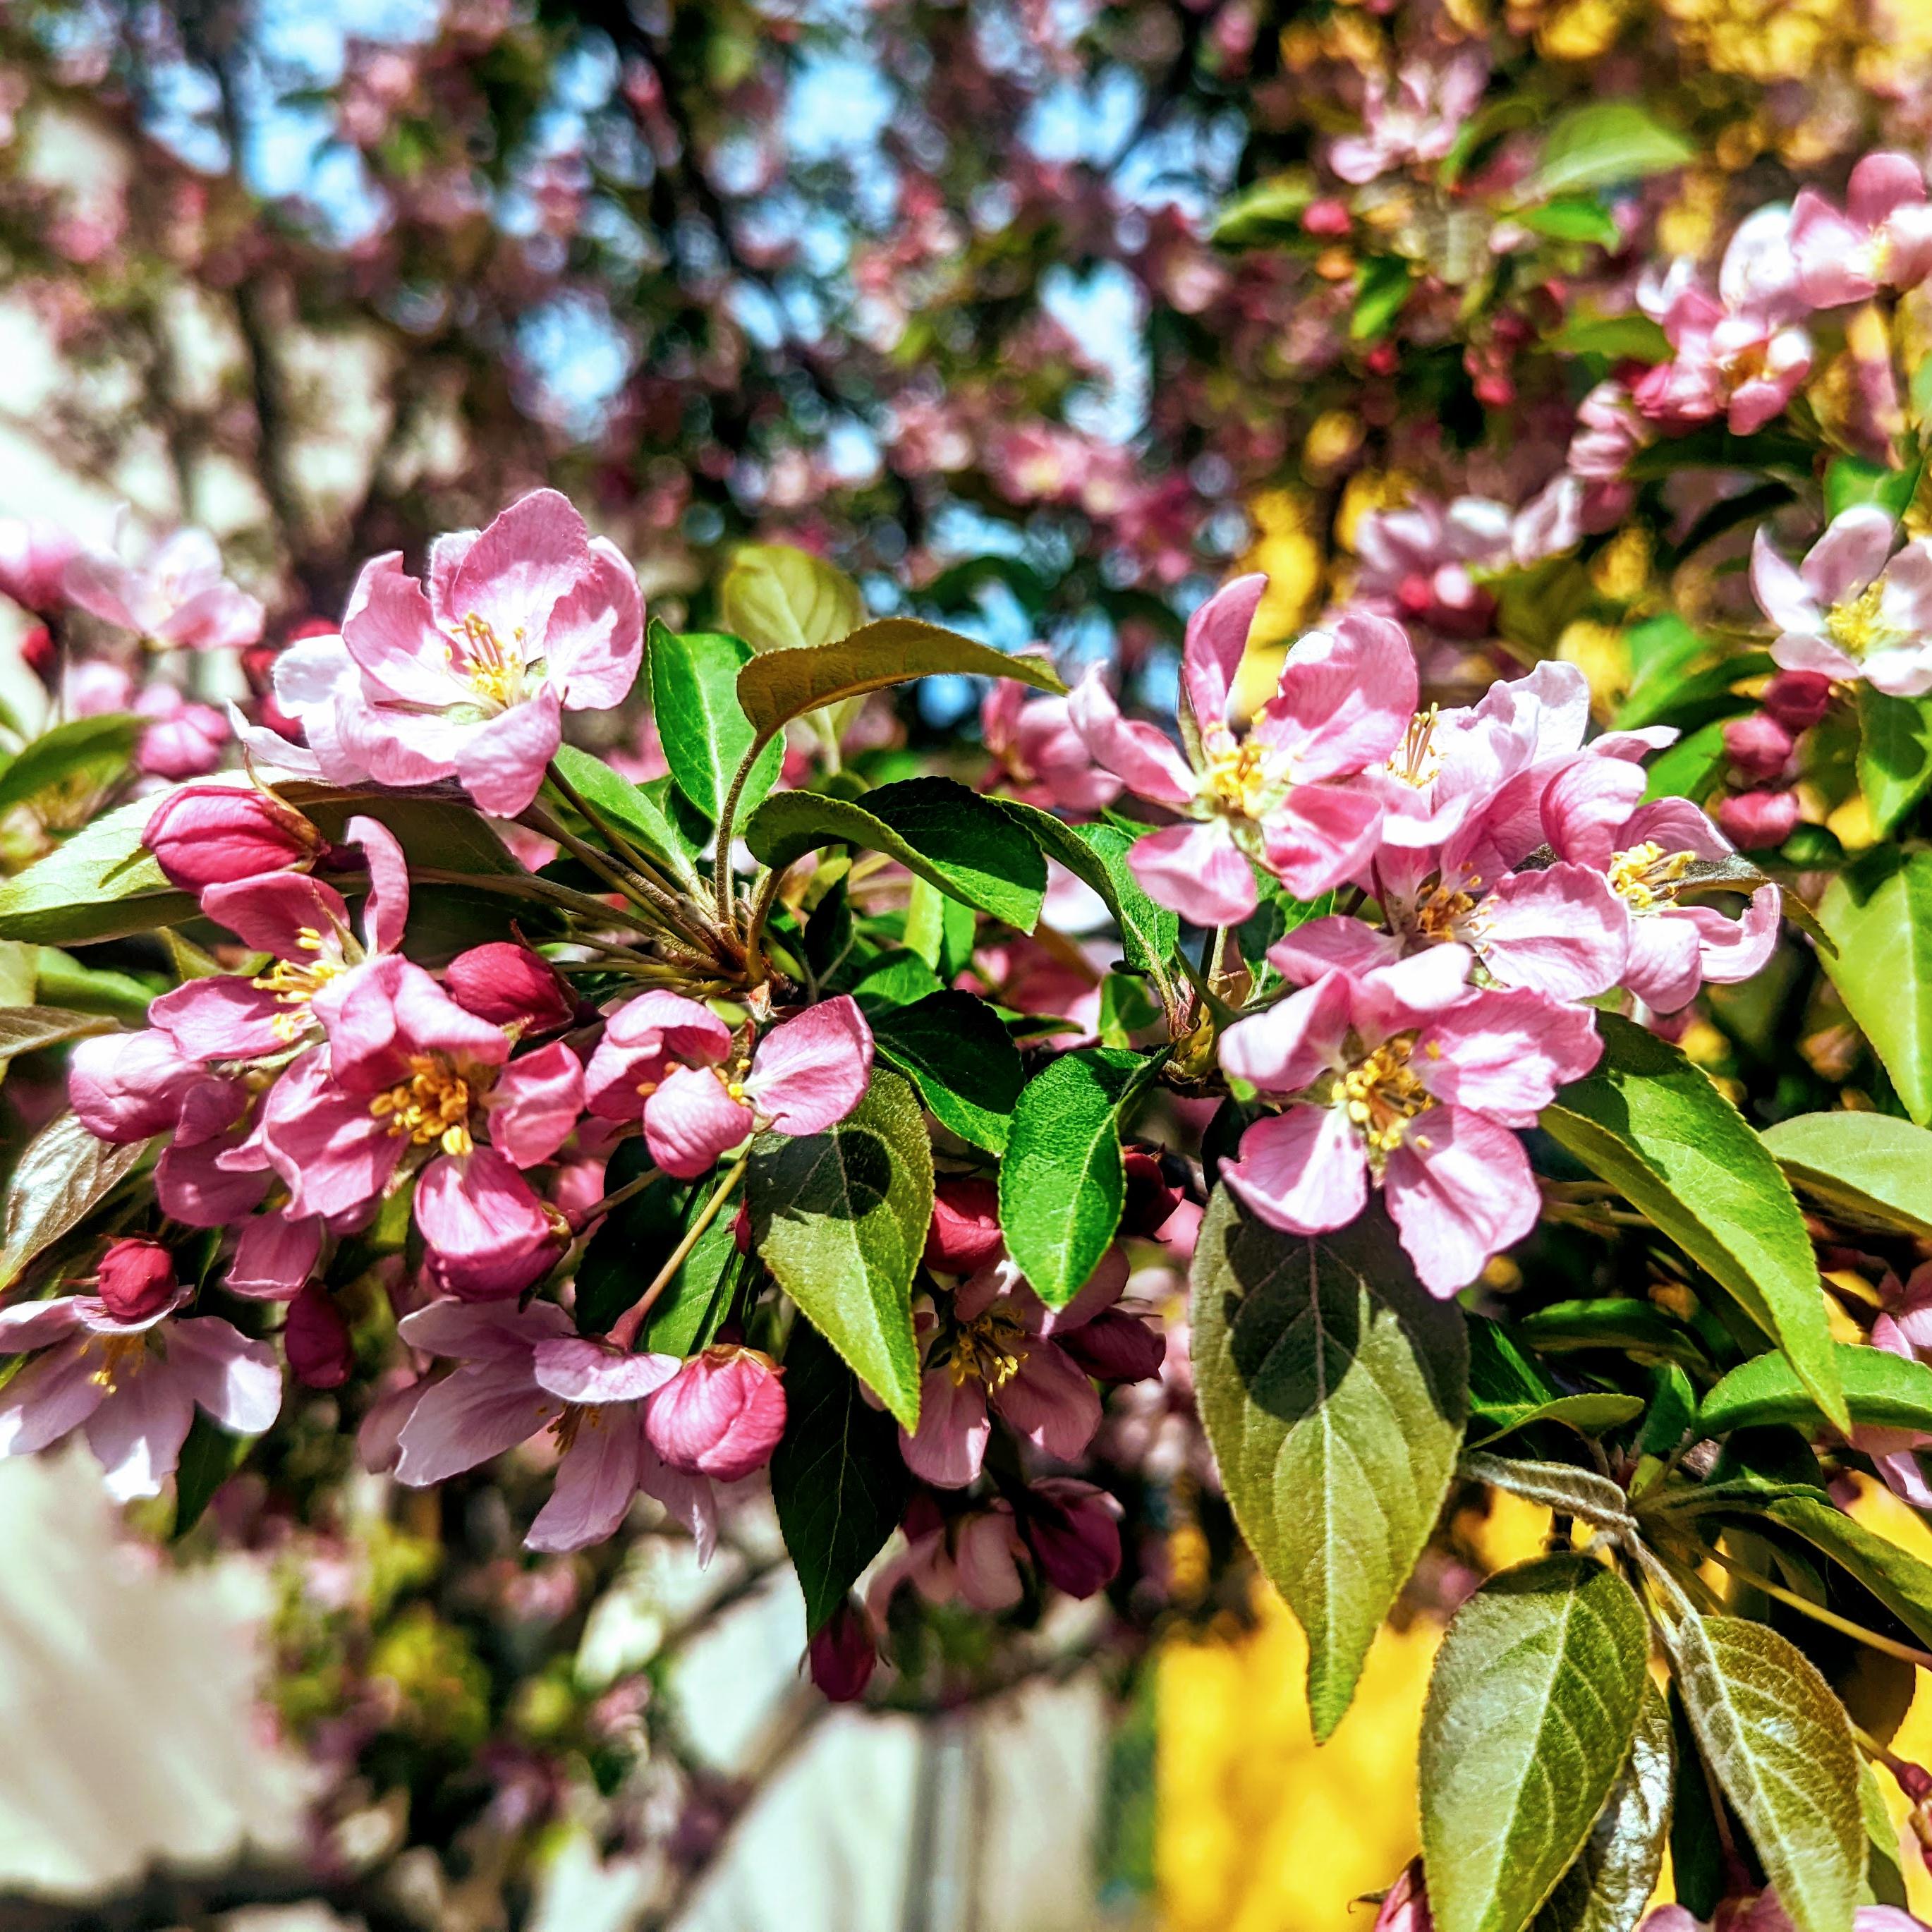 A photograph of pink blossoms on a tree.